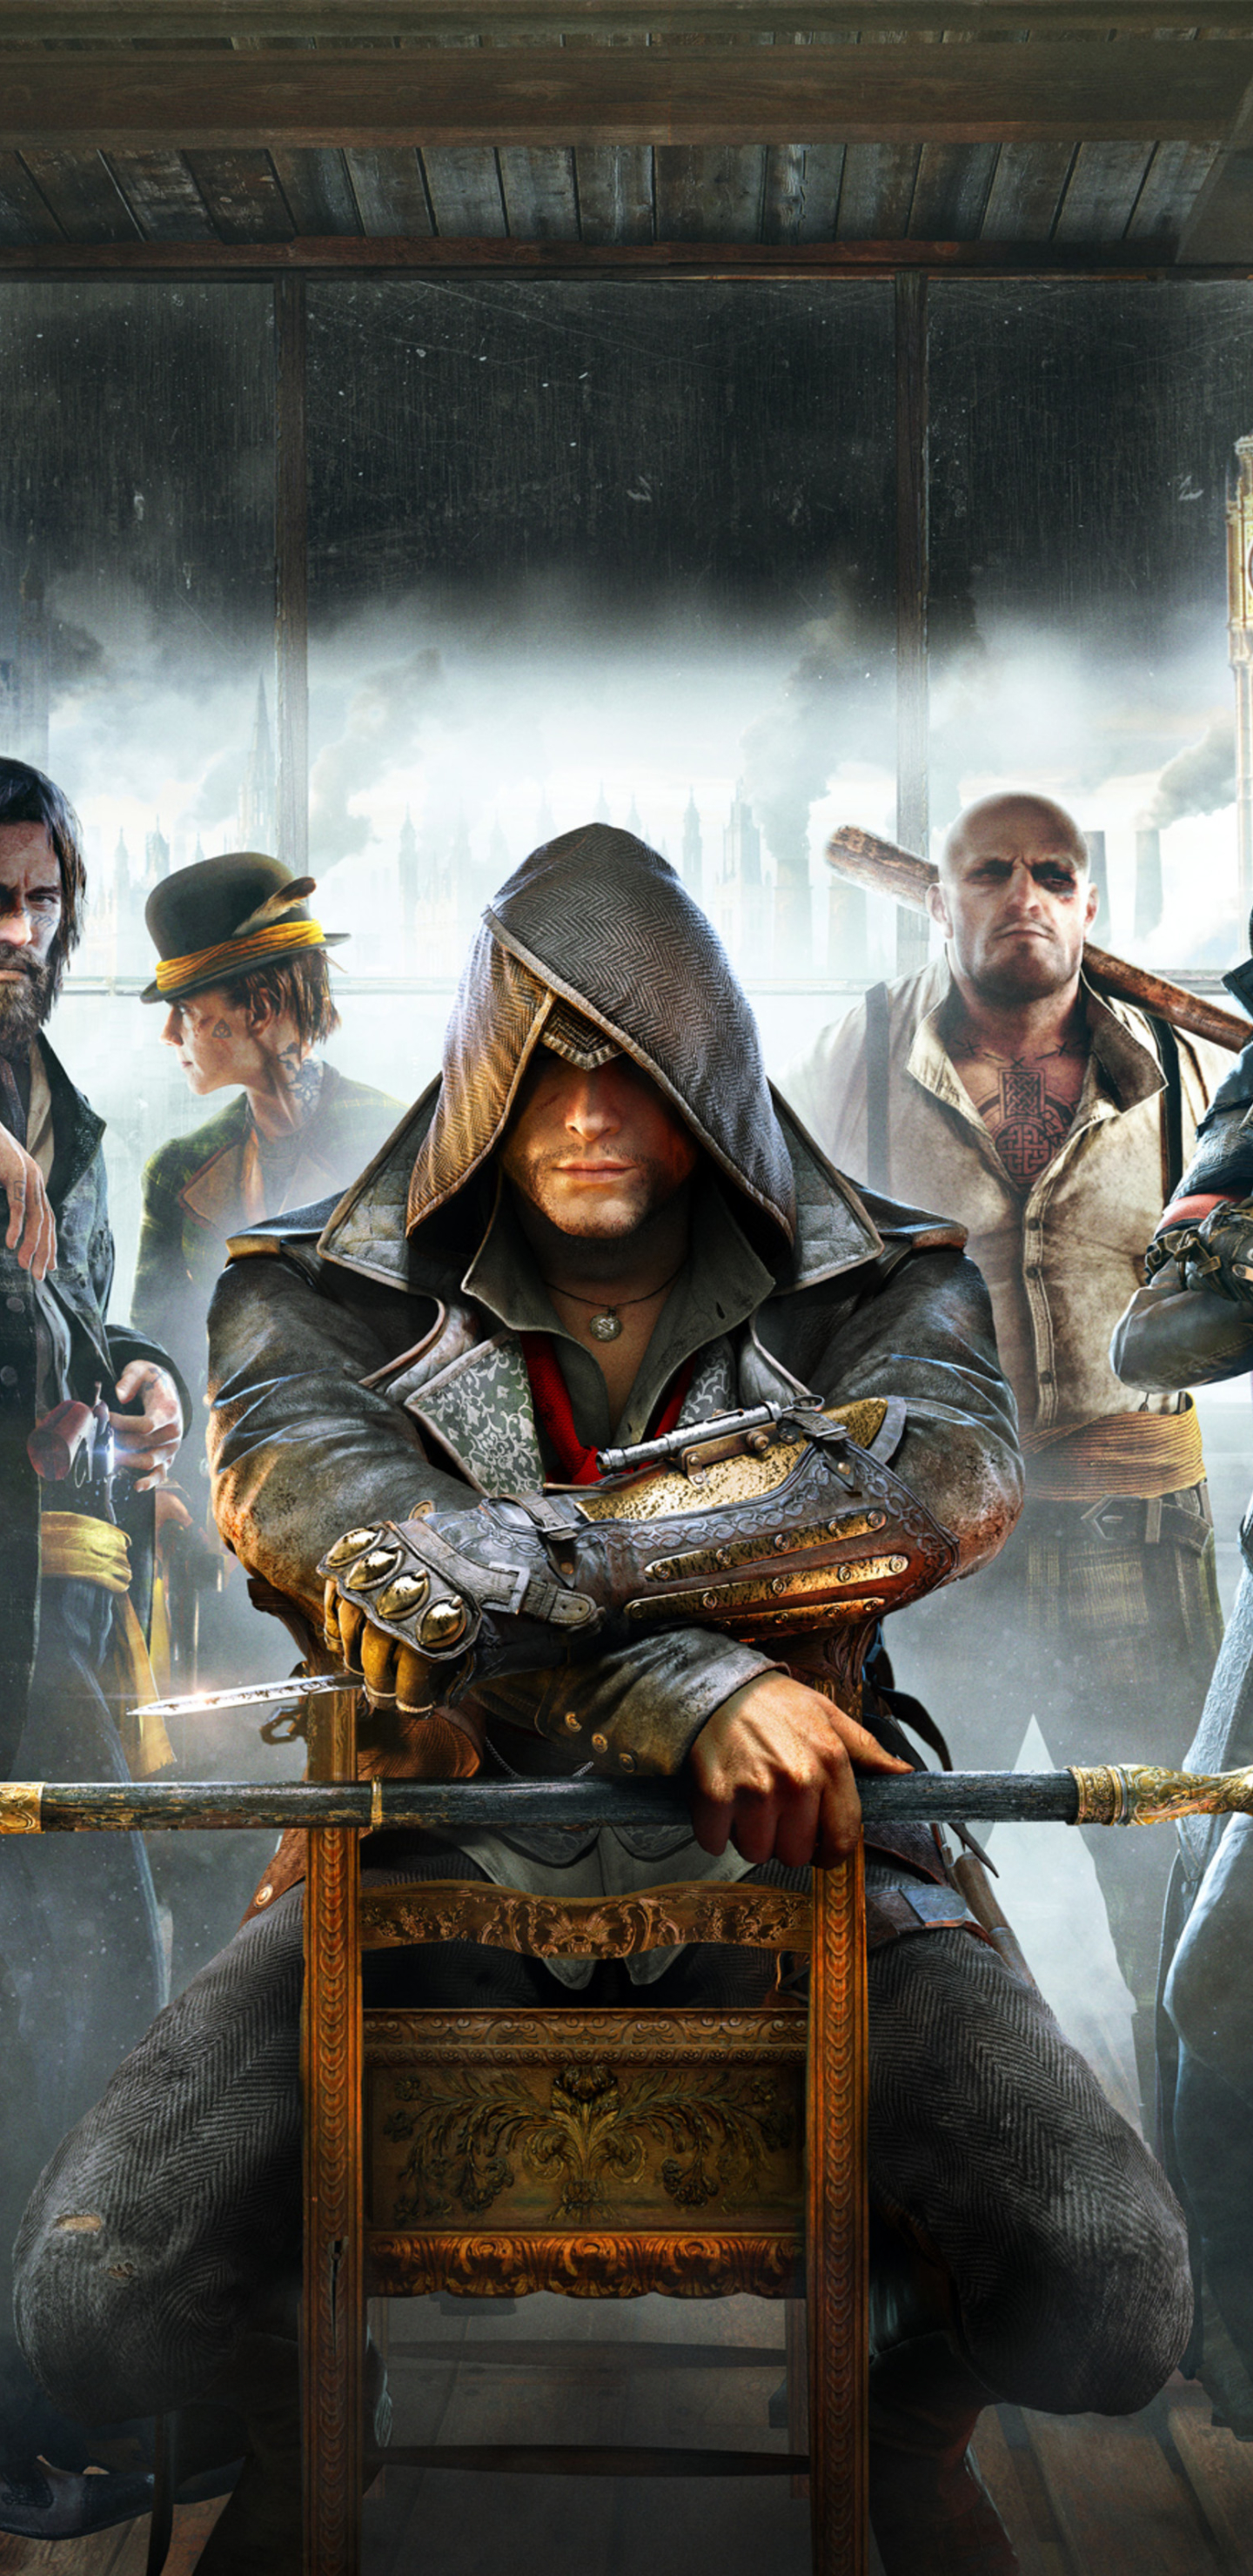 jacob frye, video game, assassin's creed: syndicate, assassin's creed